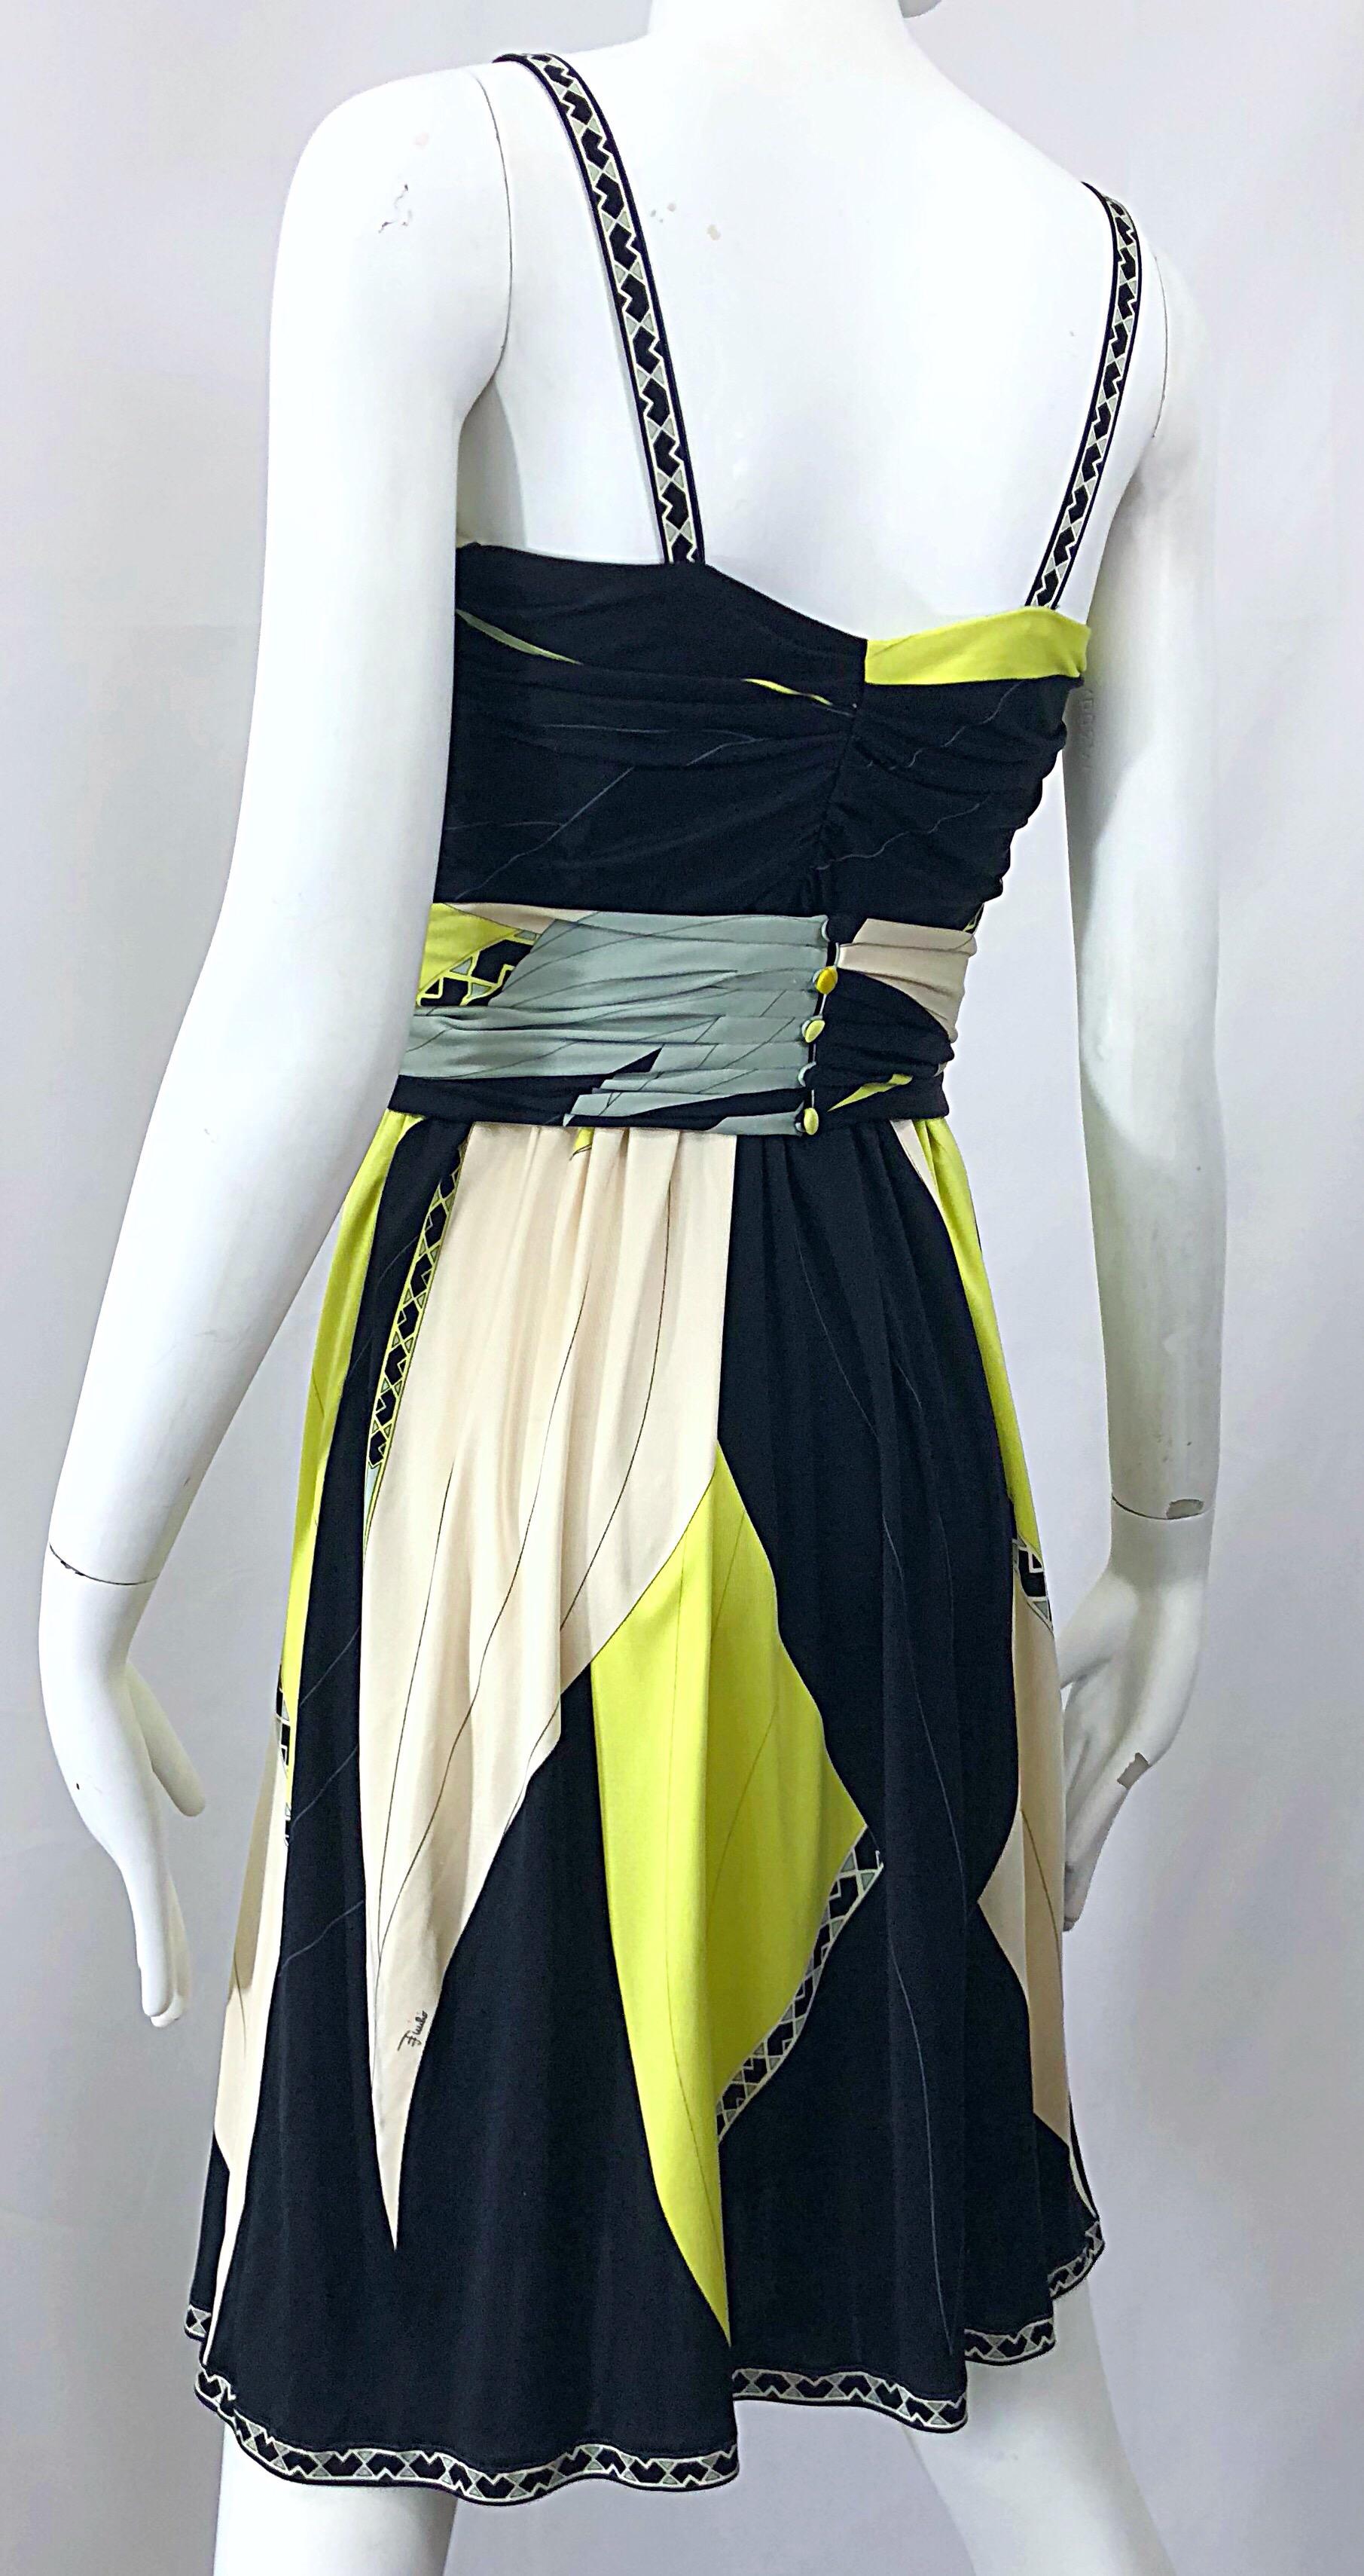 Emilio Pucci 1990s Size 6 Chartreuse Black Ivory Kaleidoscope Silk Jersey Dress For Sale 1